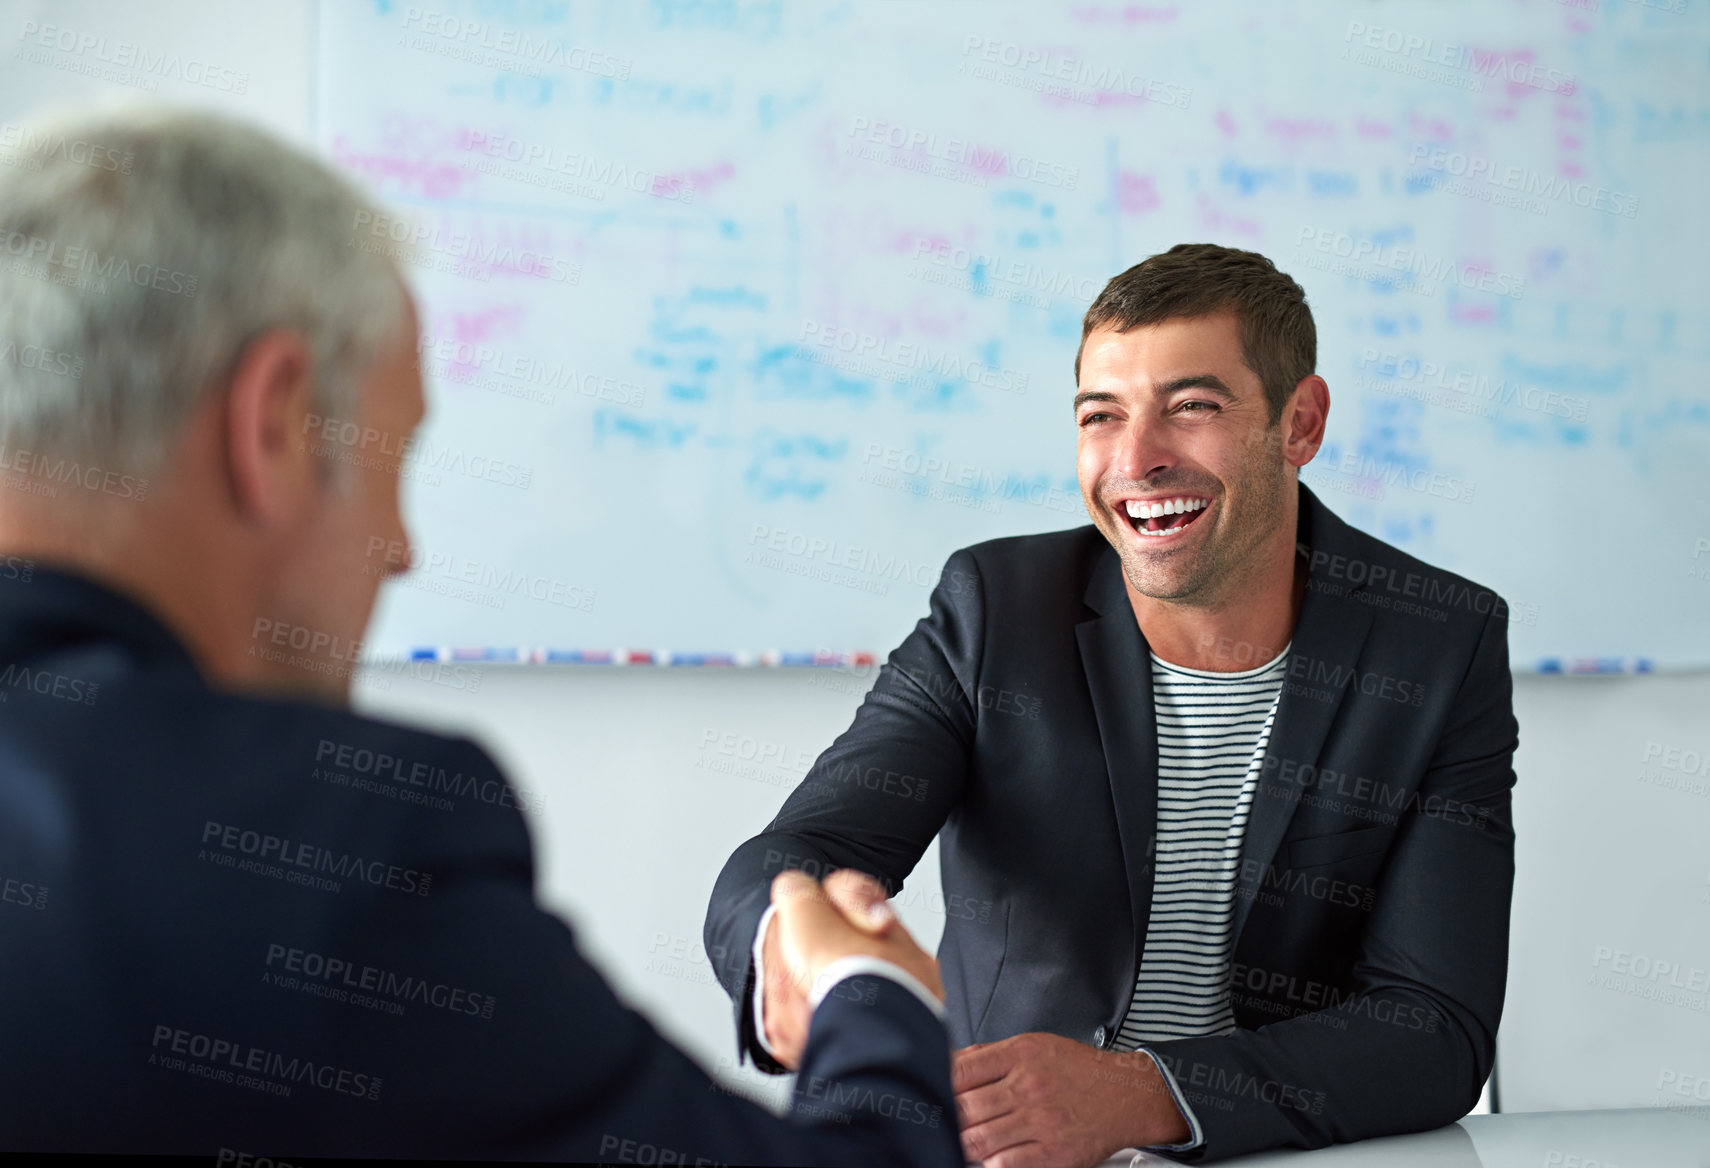 Buy stock photo Shot of a businessman shaking hands with a colleague in a meeting